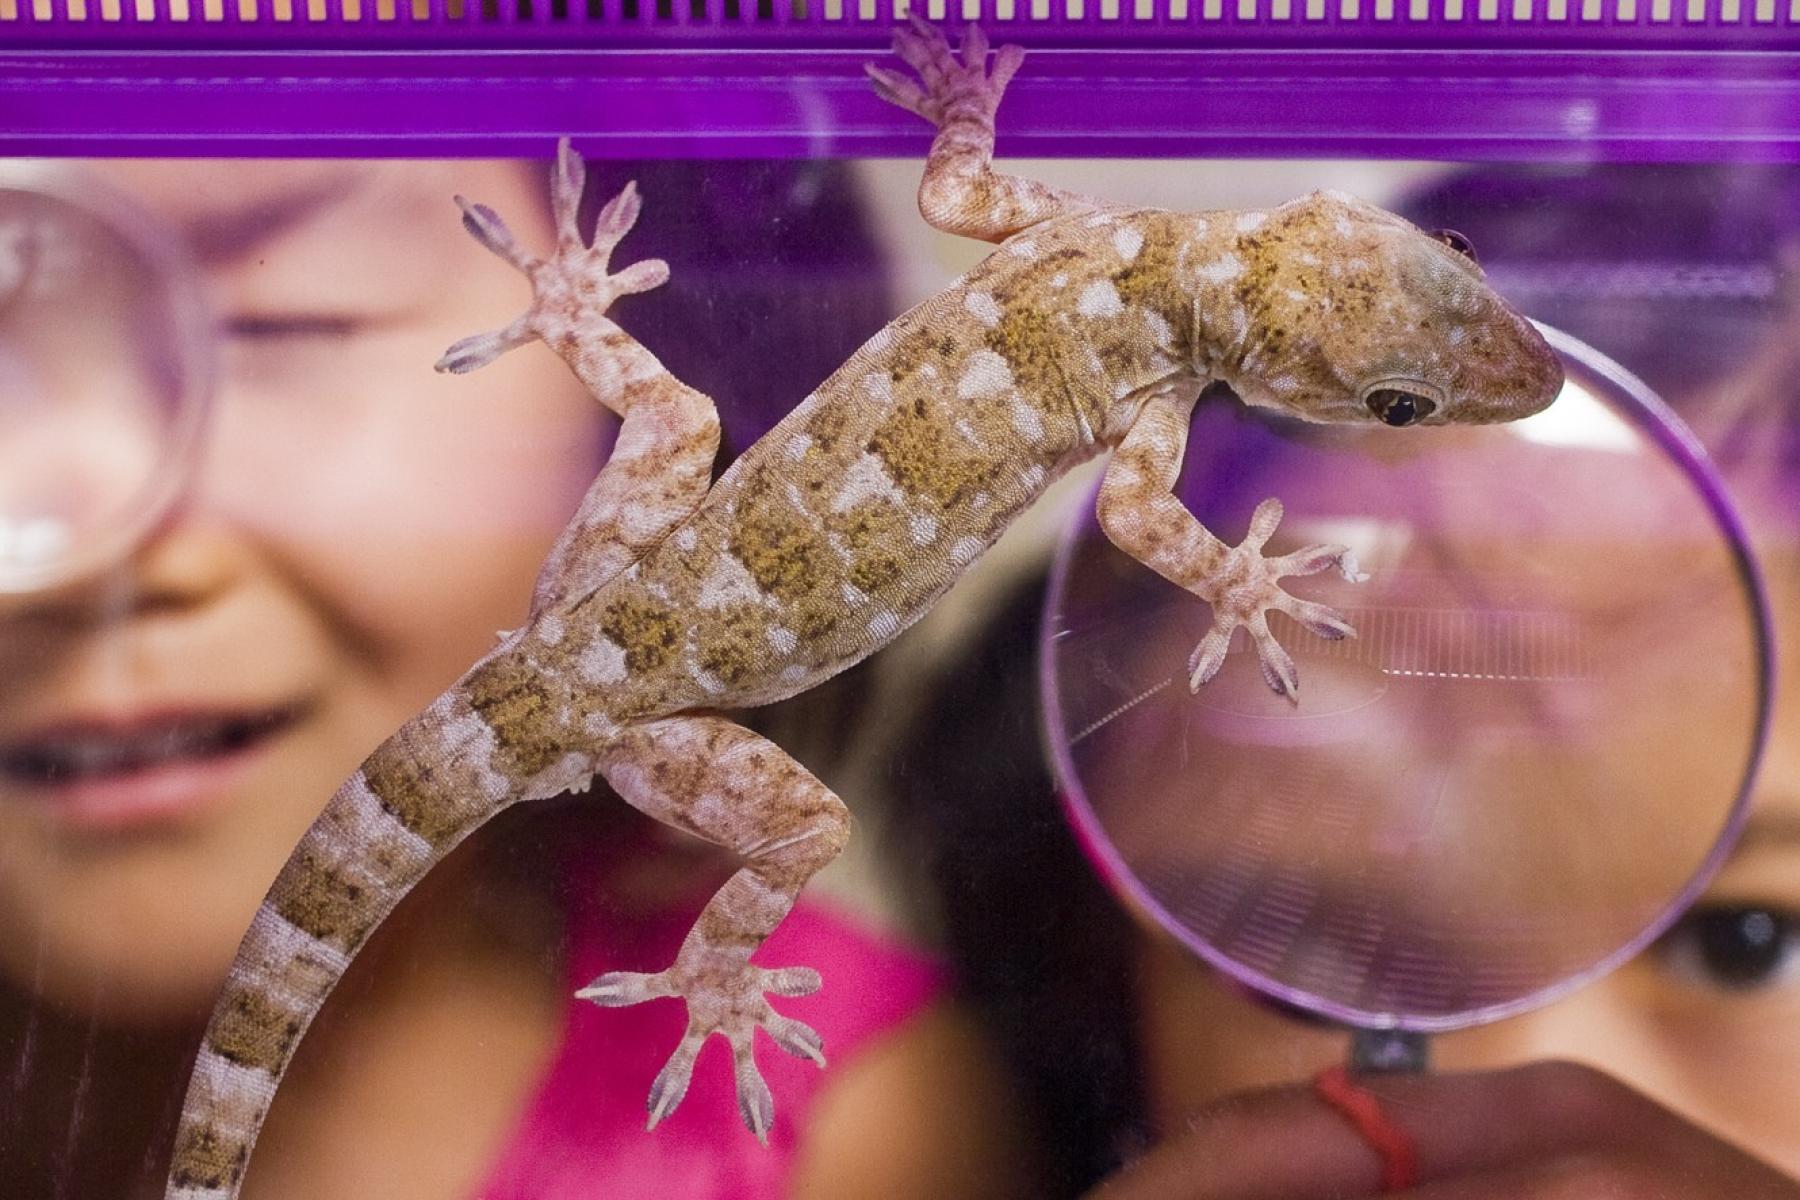 Children looking at Gecko with magnifying glass